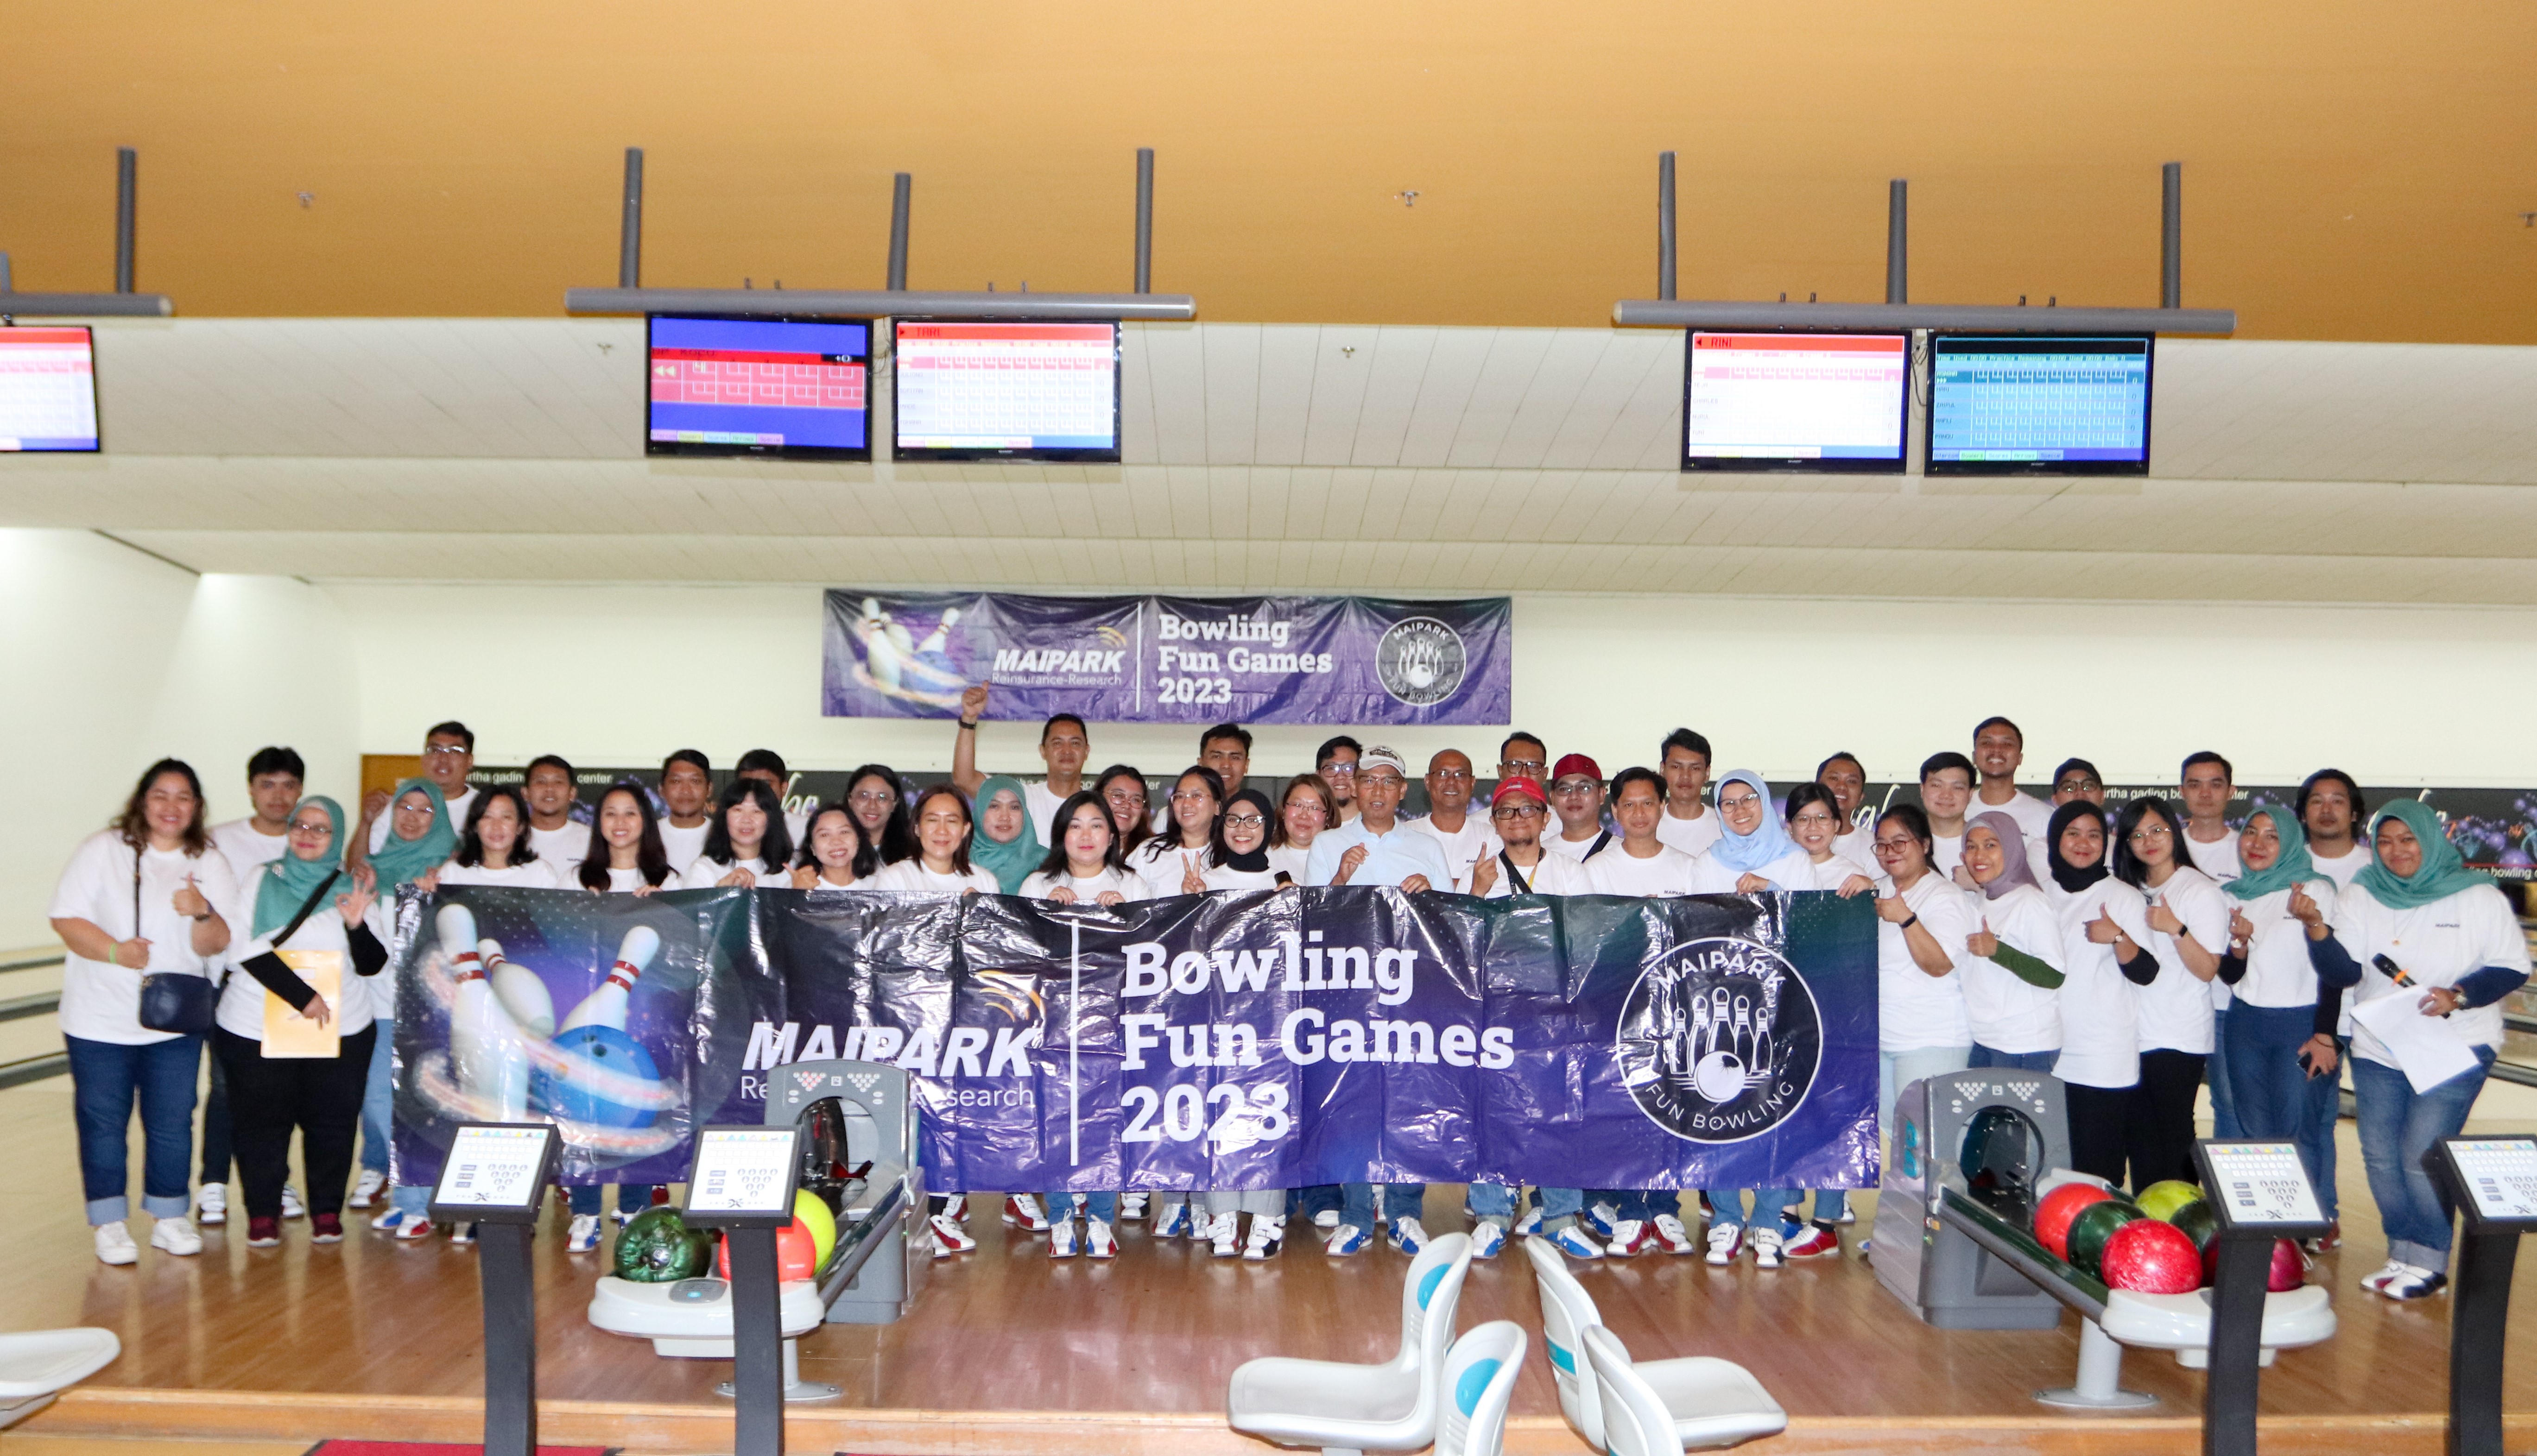 Session 4 closed the MAIPARK 2023 Bowling Fun Games series